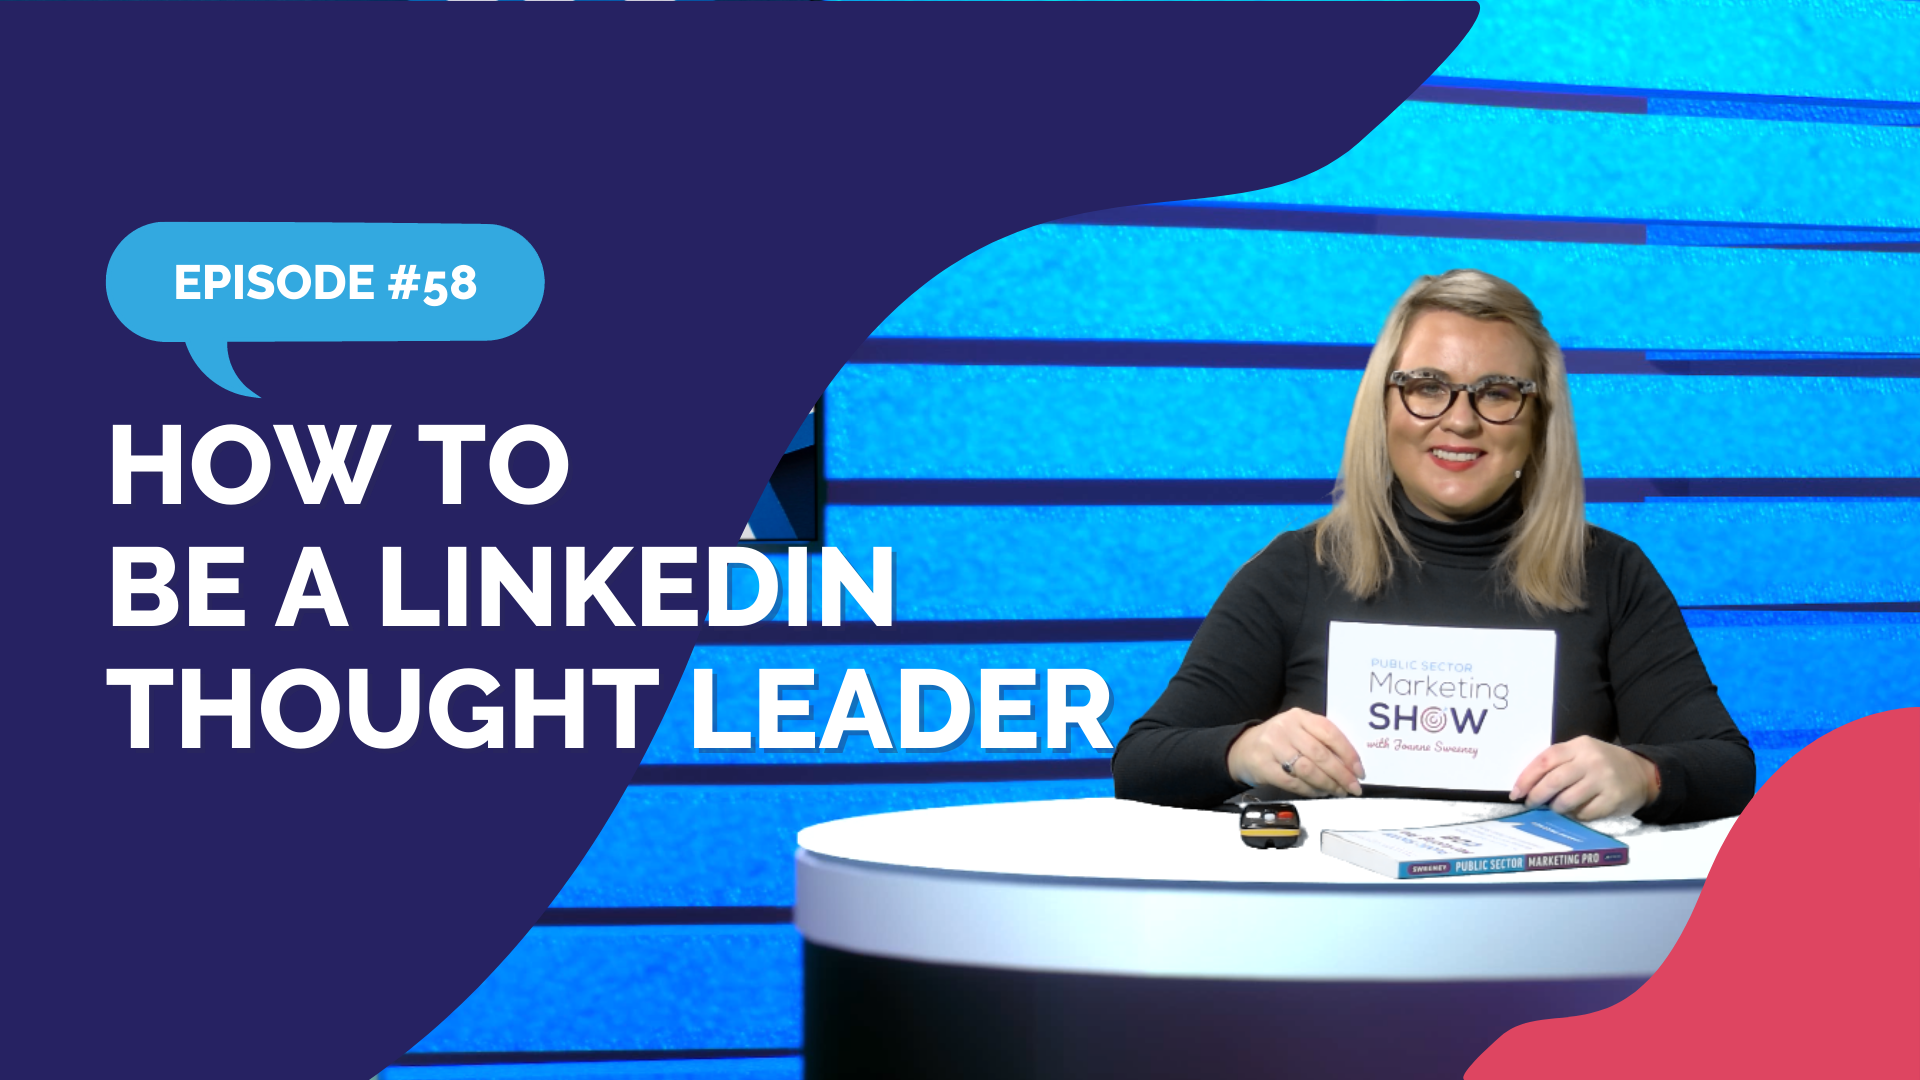 Episode 58 - How to Be A LinkedIn Thought Leader